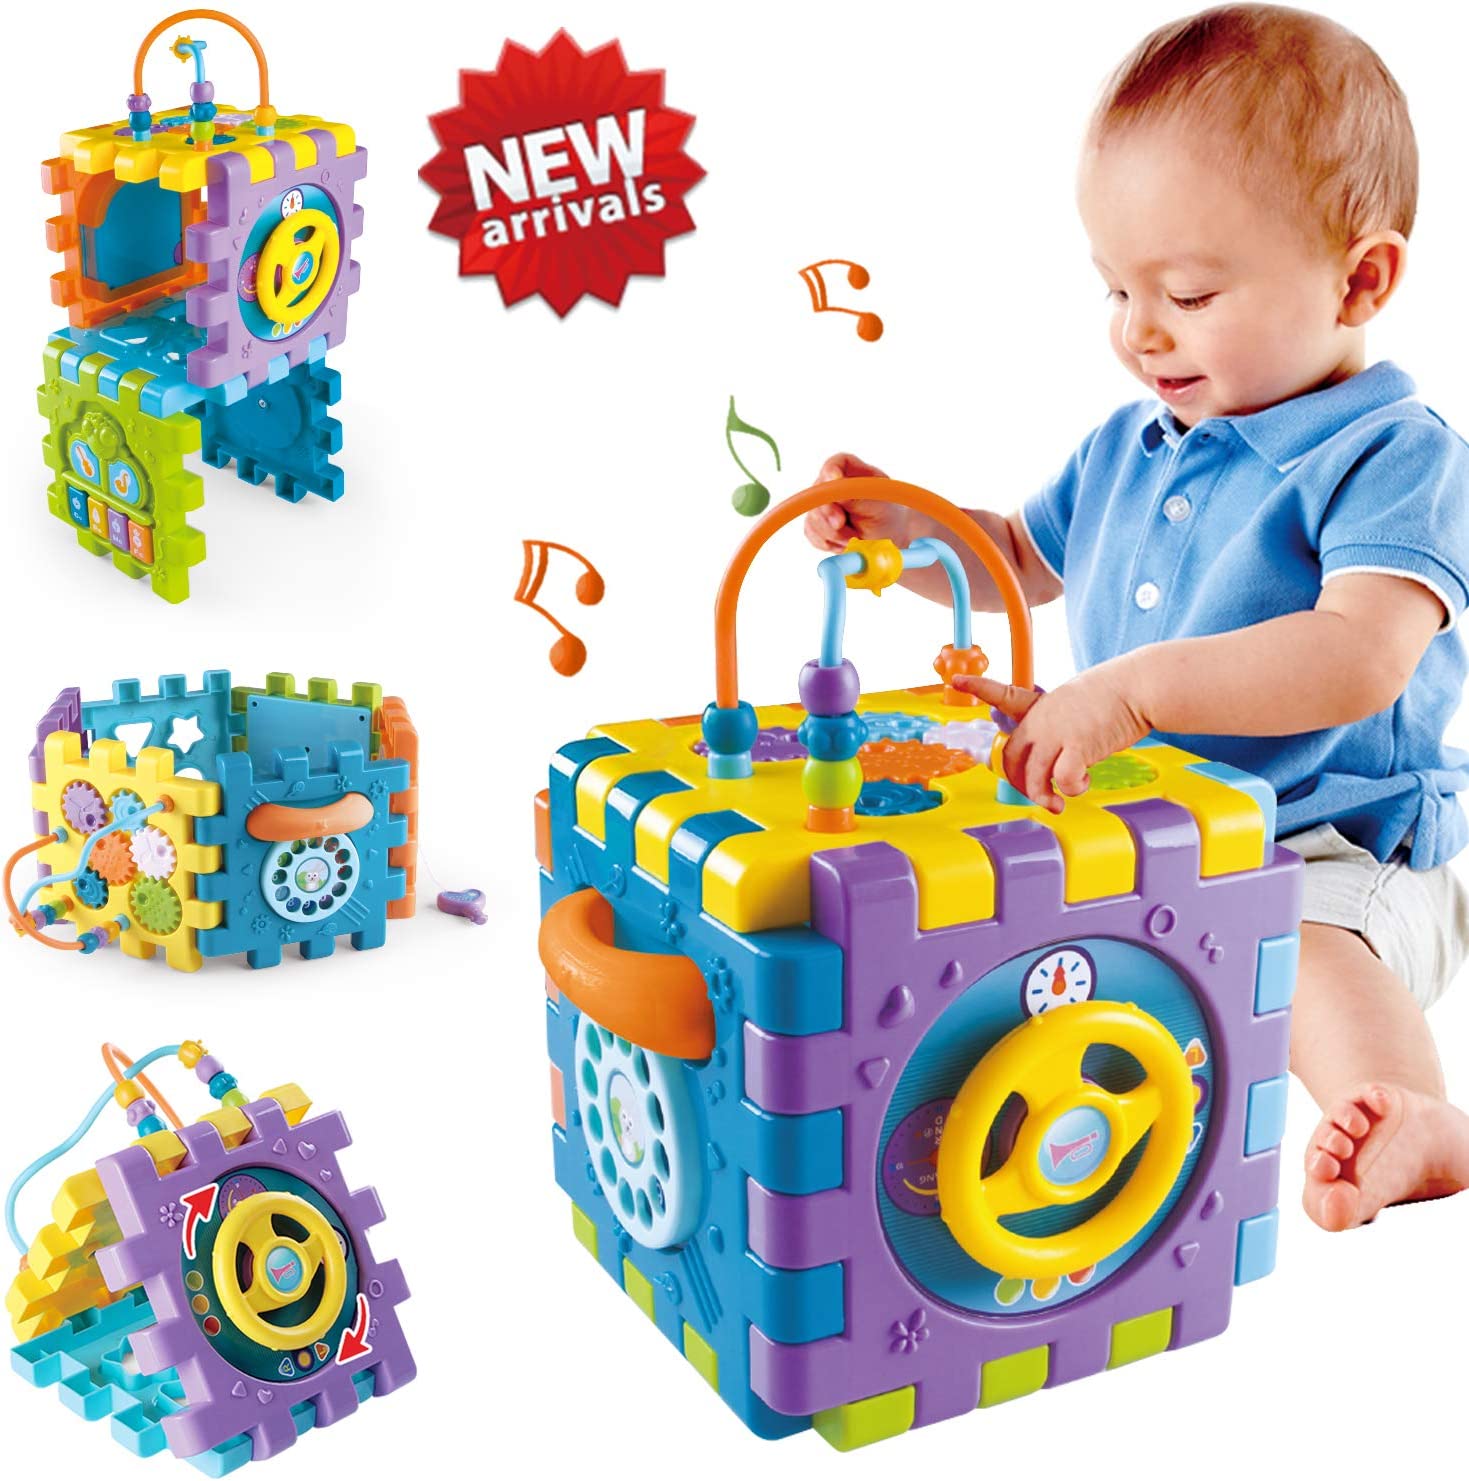 6-in-1 Multifunctional Play Center 